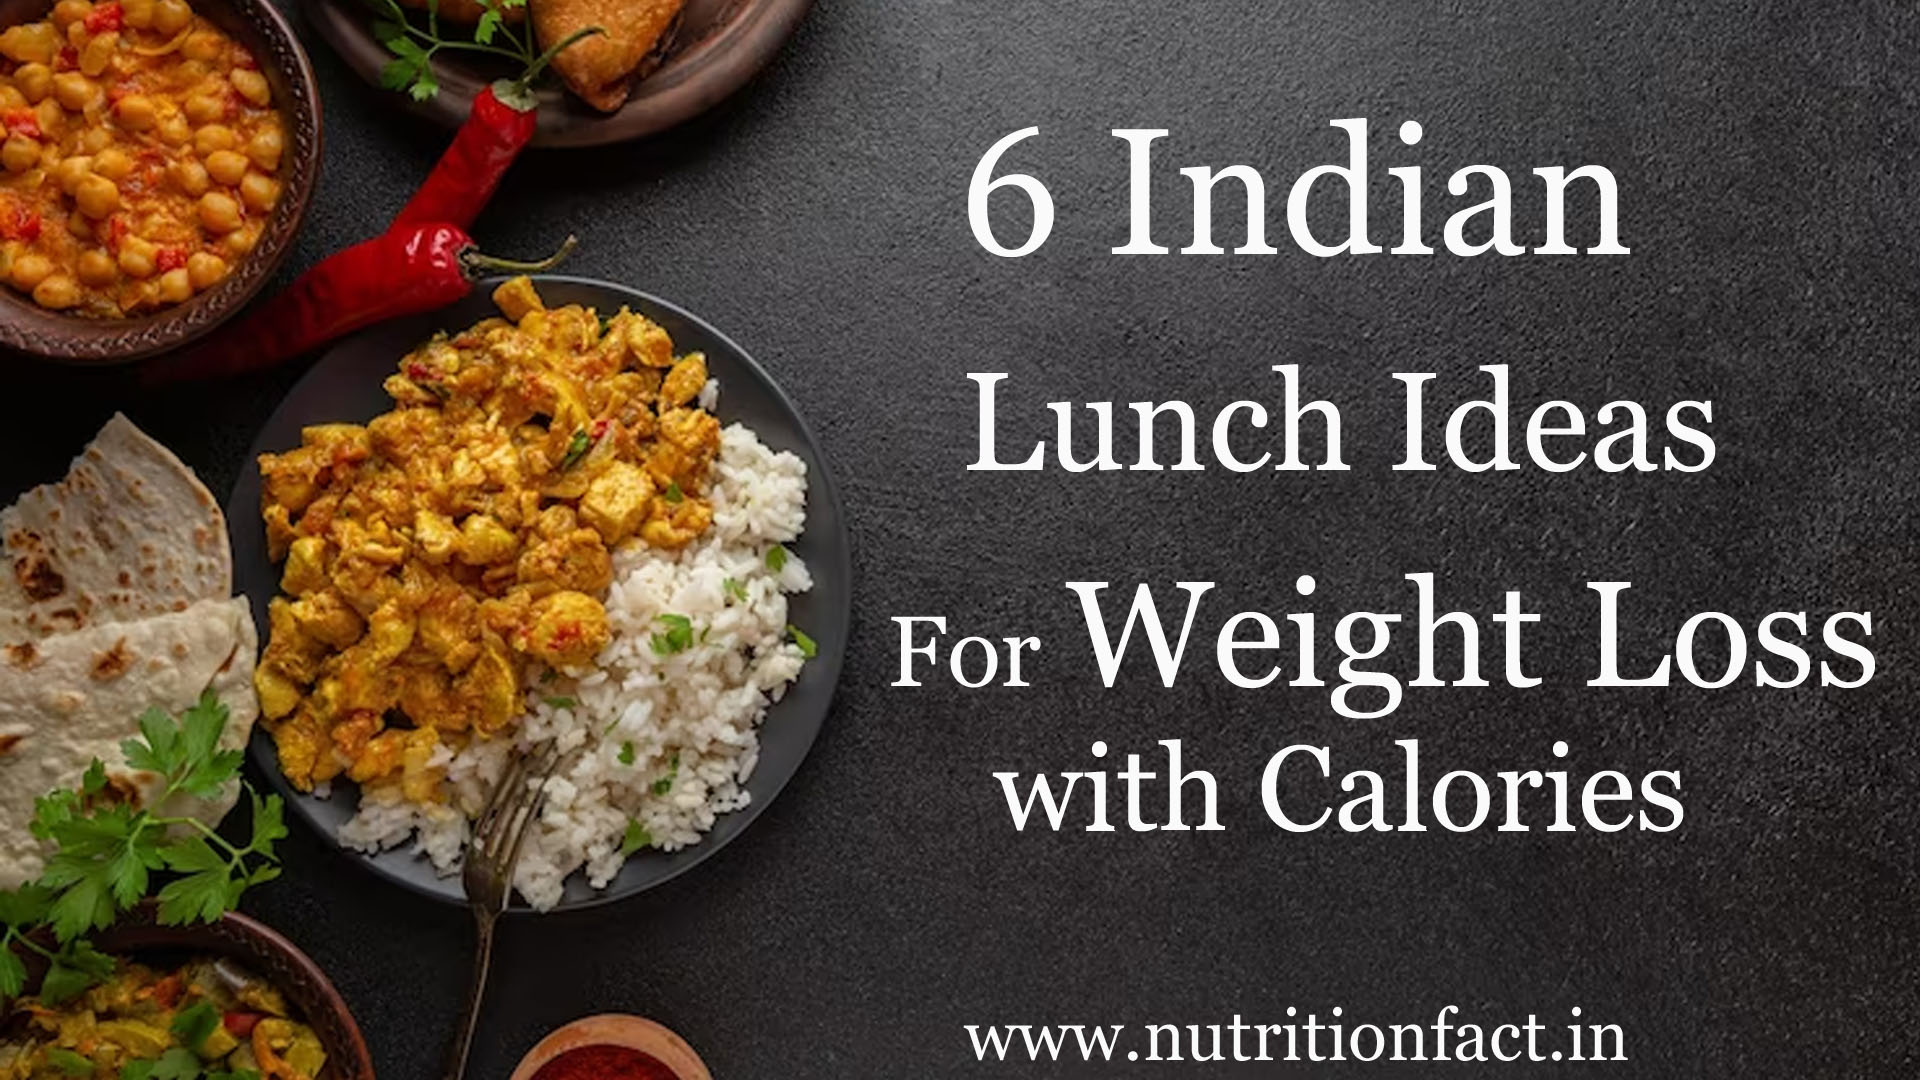 6 Indian Lunch Recipes For Weight Loss with Calories